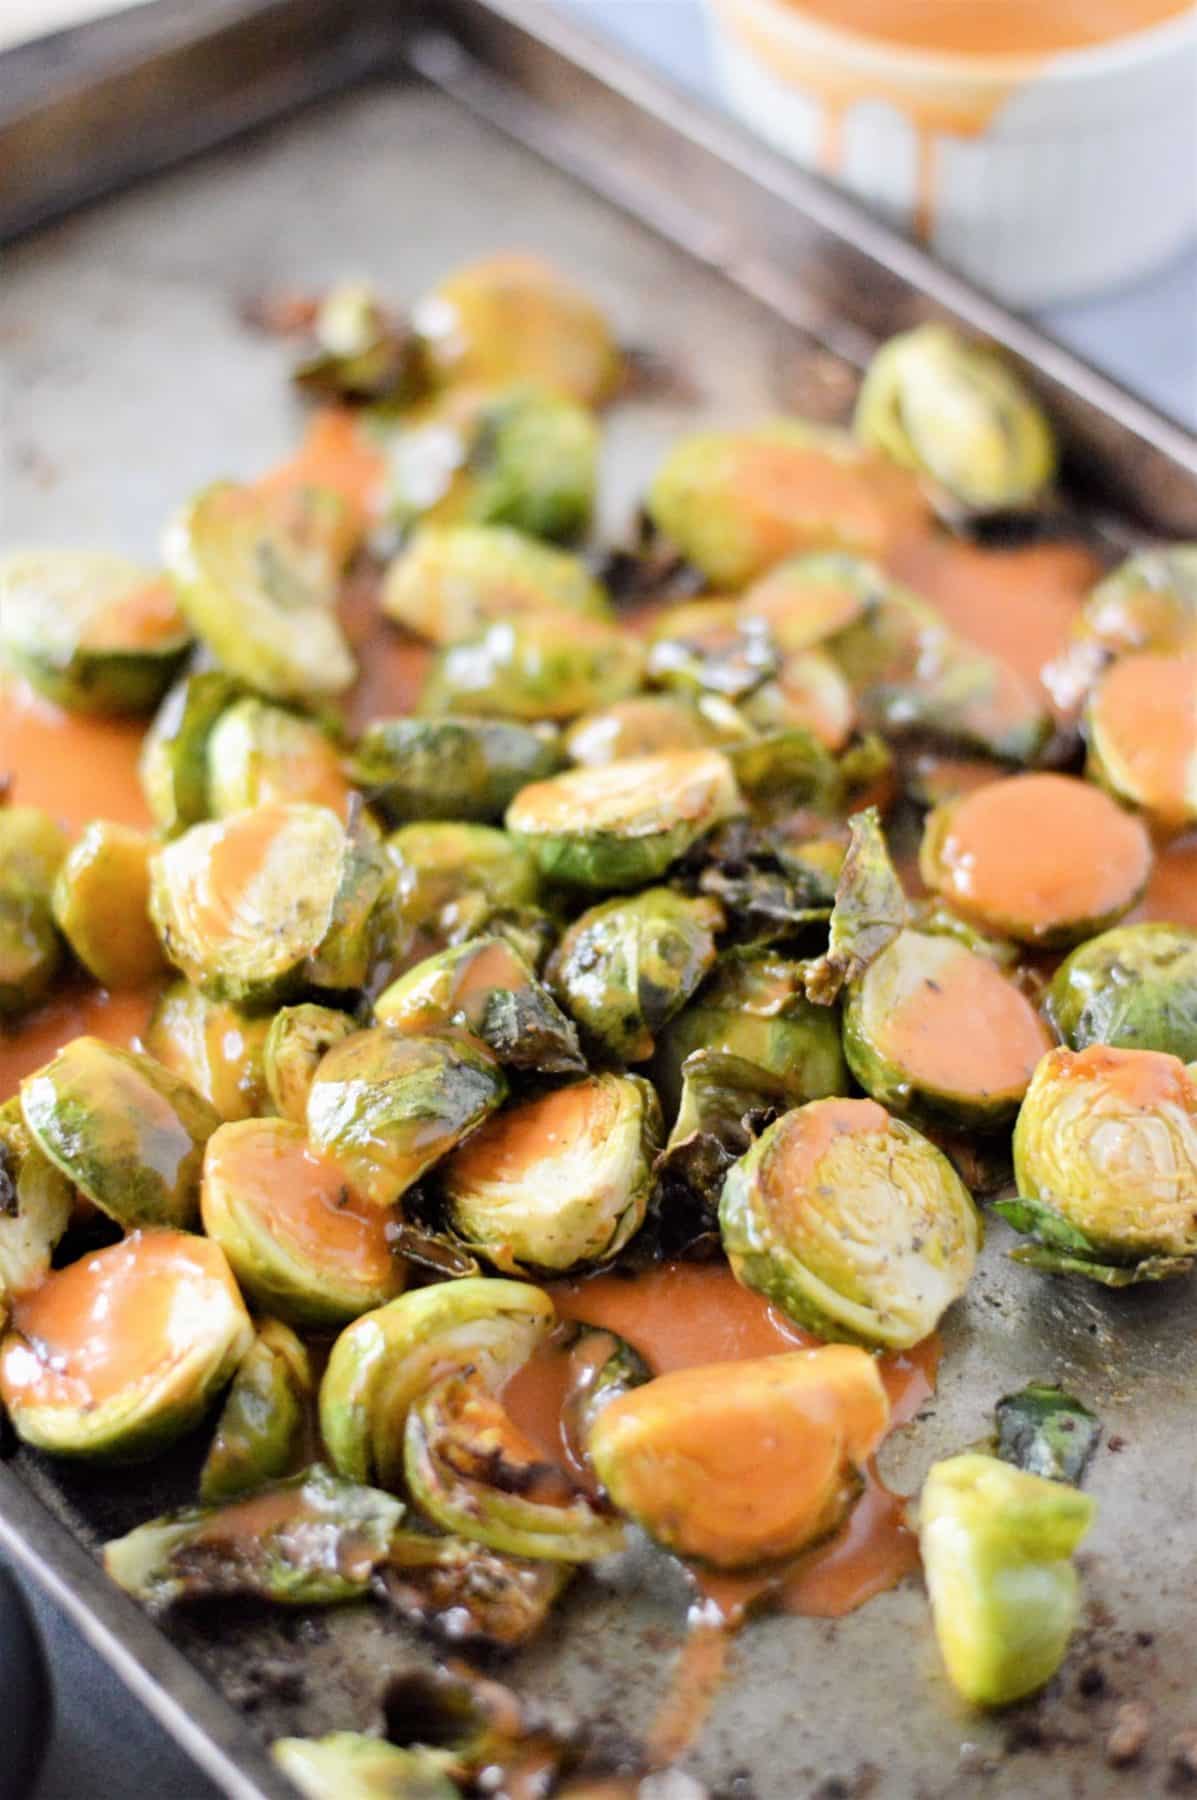 buffalo sauce on roasted brussels sprouts